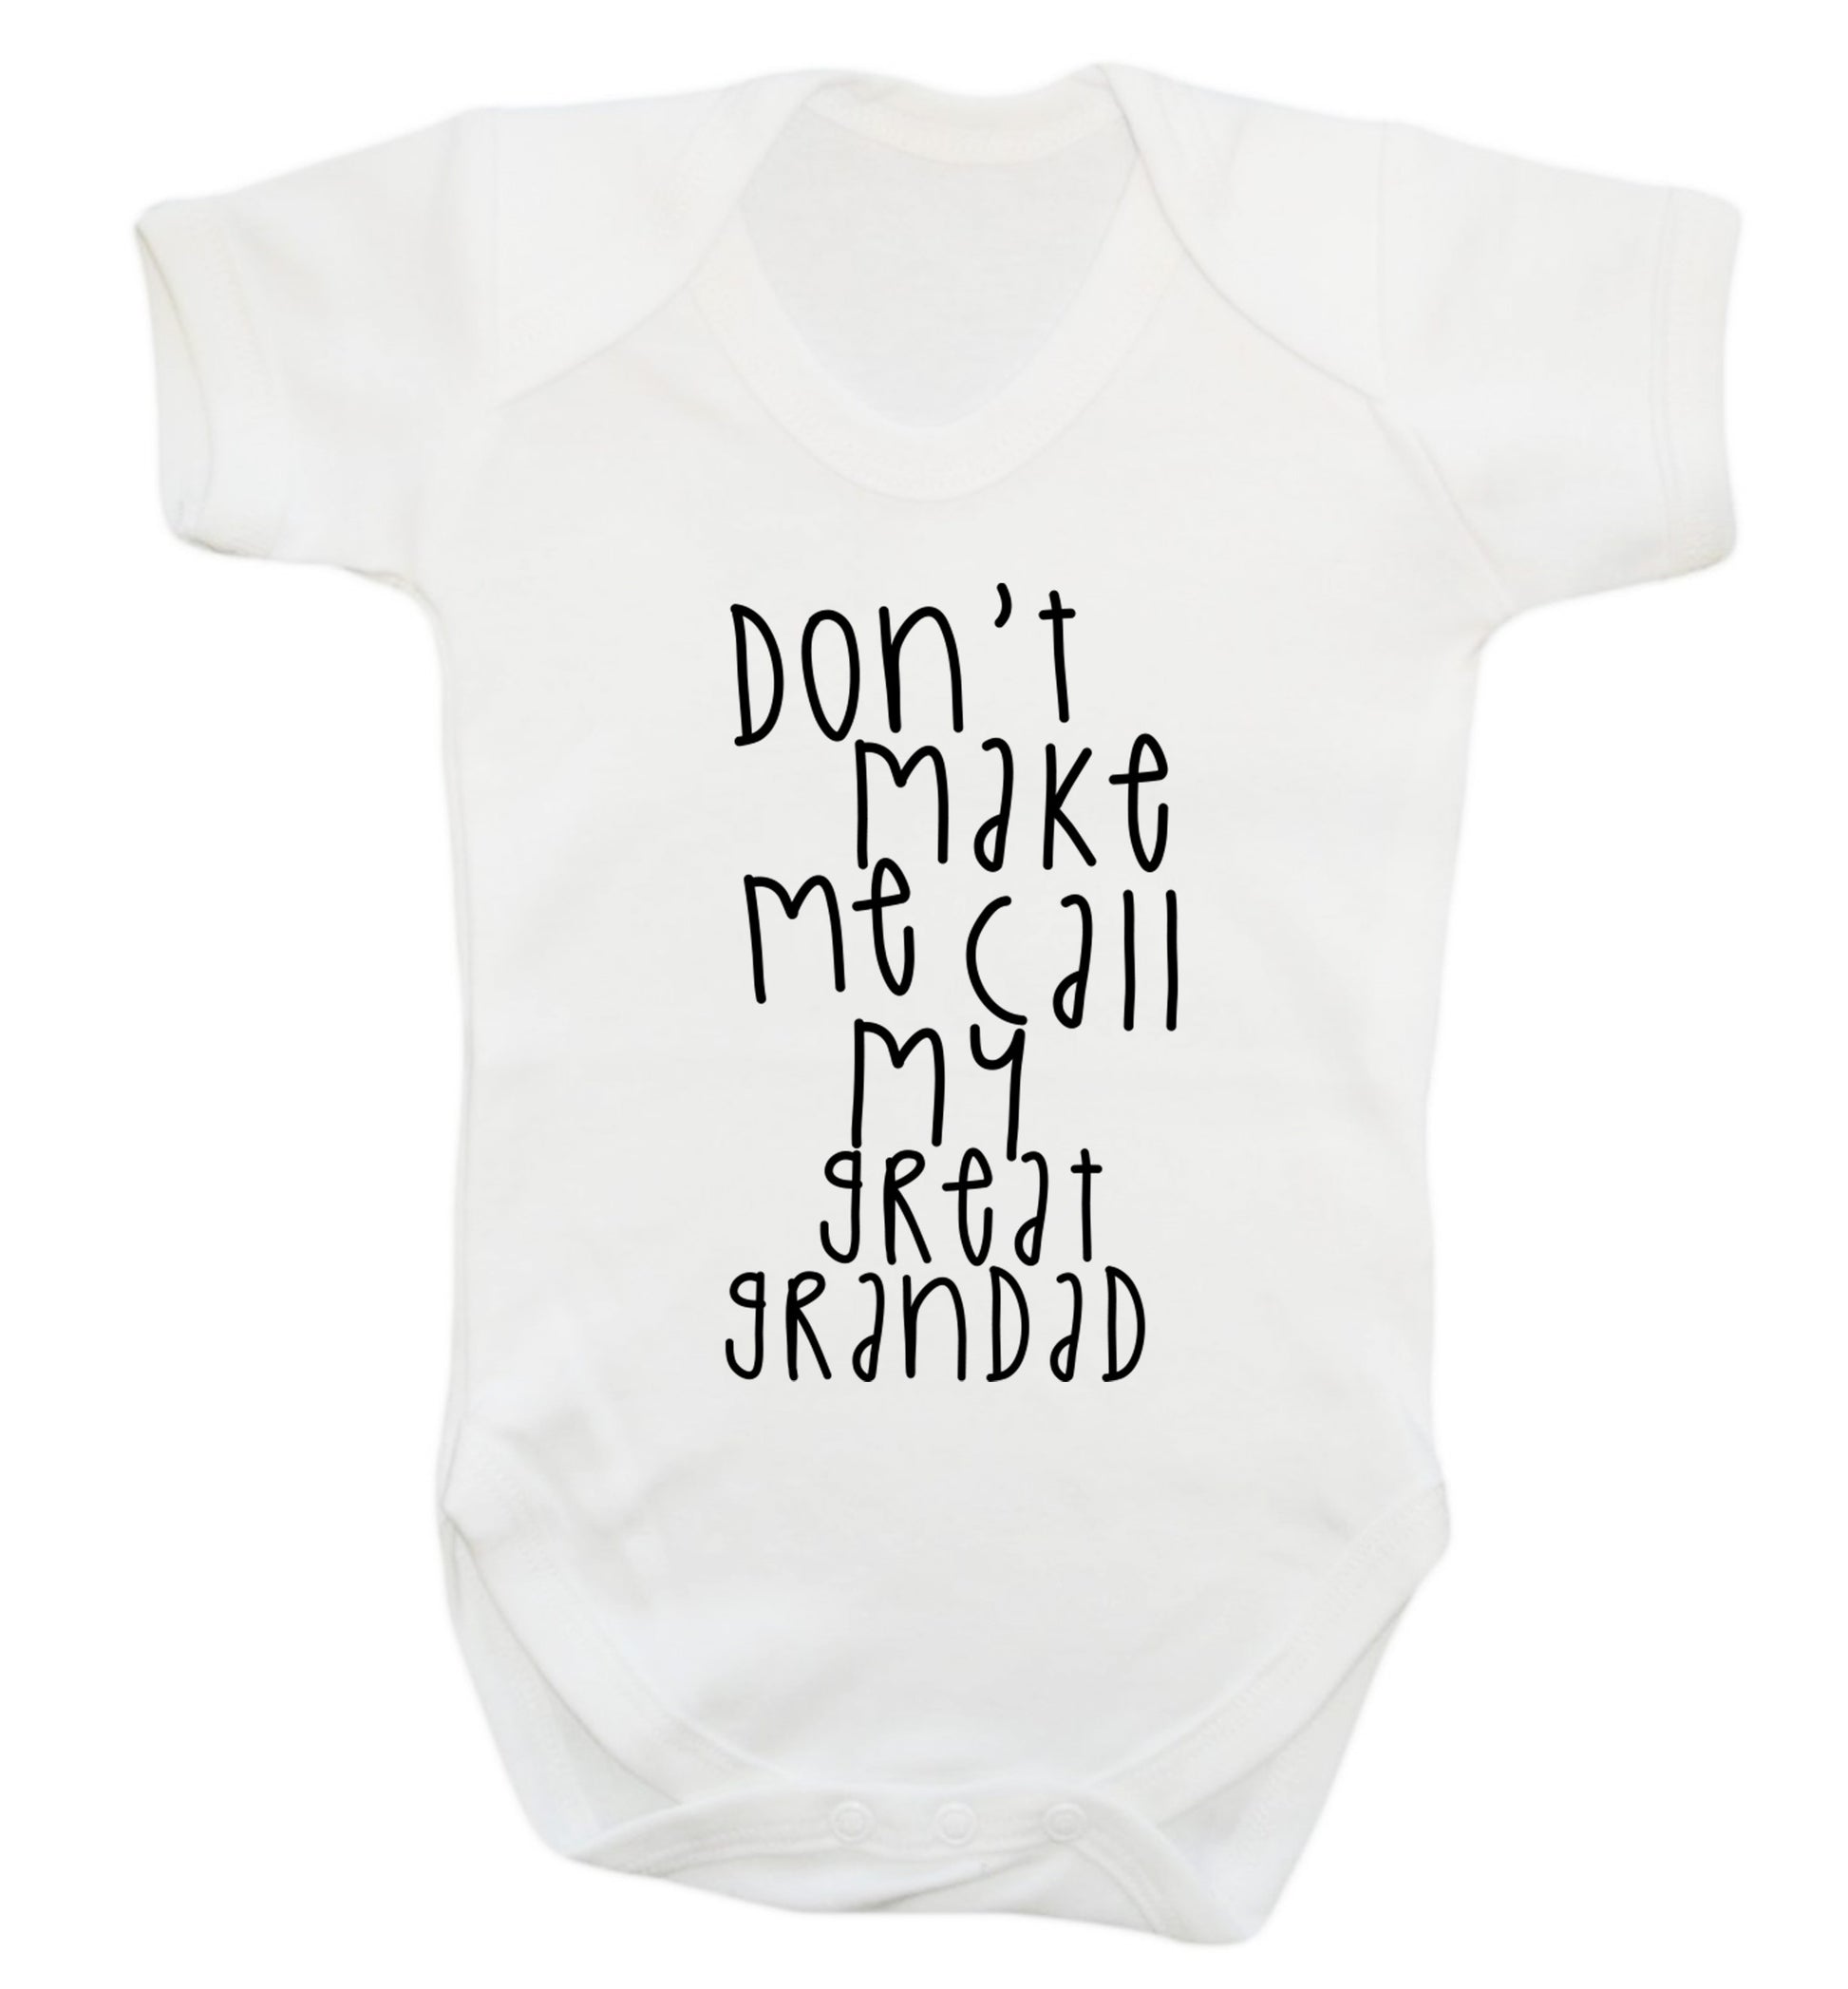 Don't make me call my great grandad Baby Vest white 18-24 months